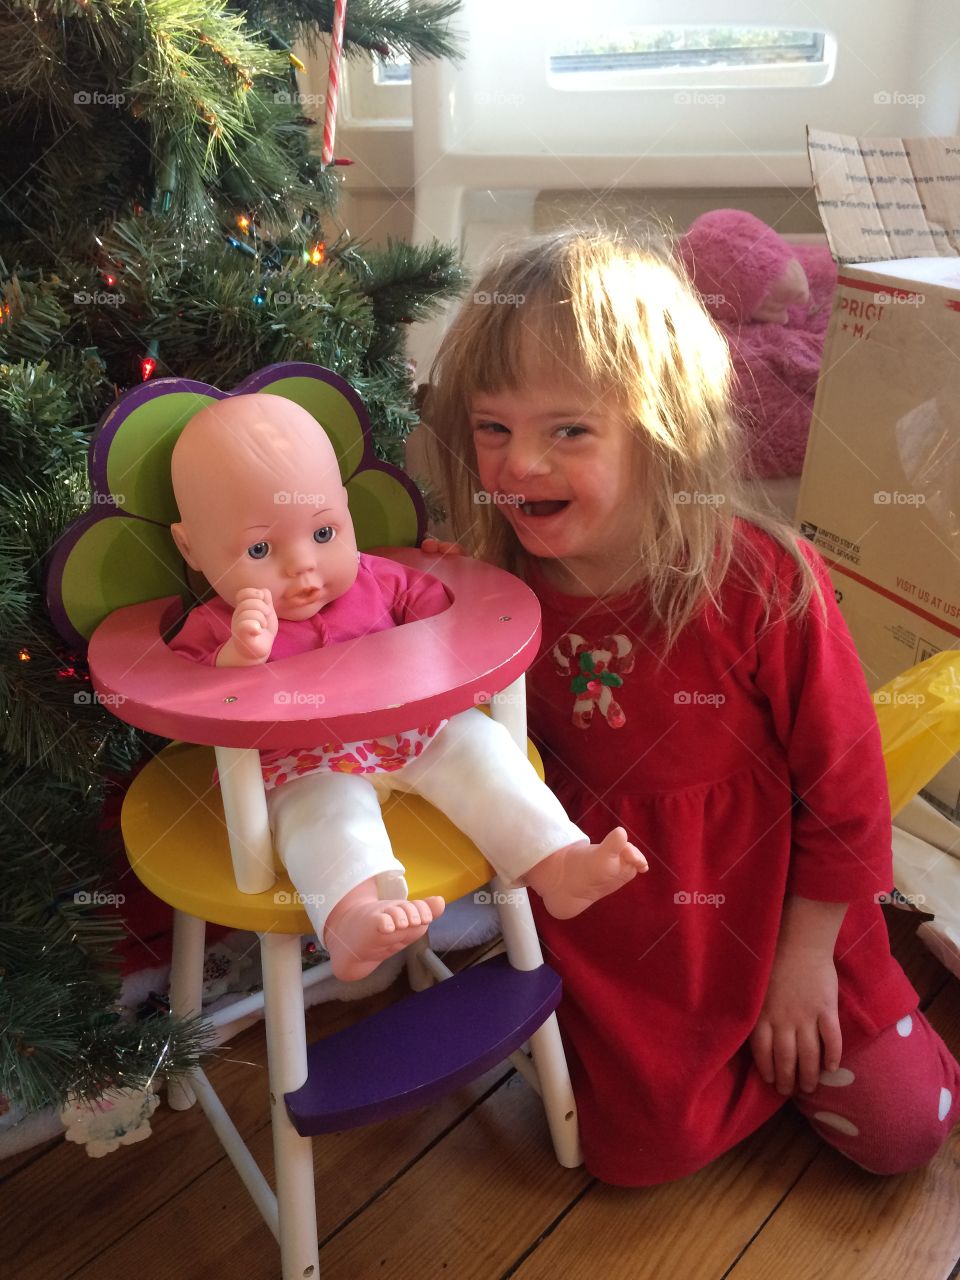 Young girl with Down syndrome playing with doll she got for Christmas by Christmas tree